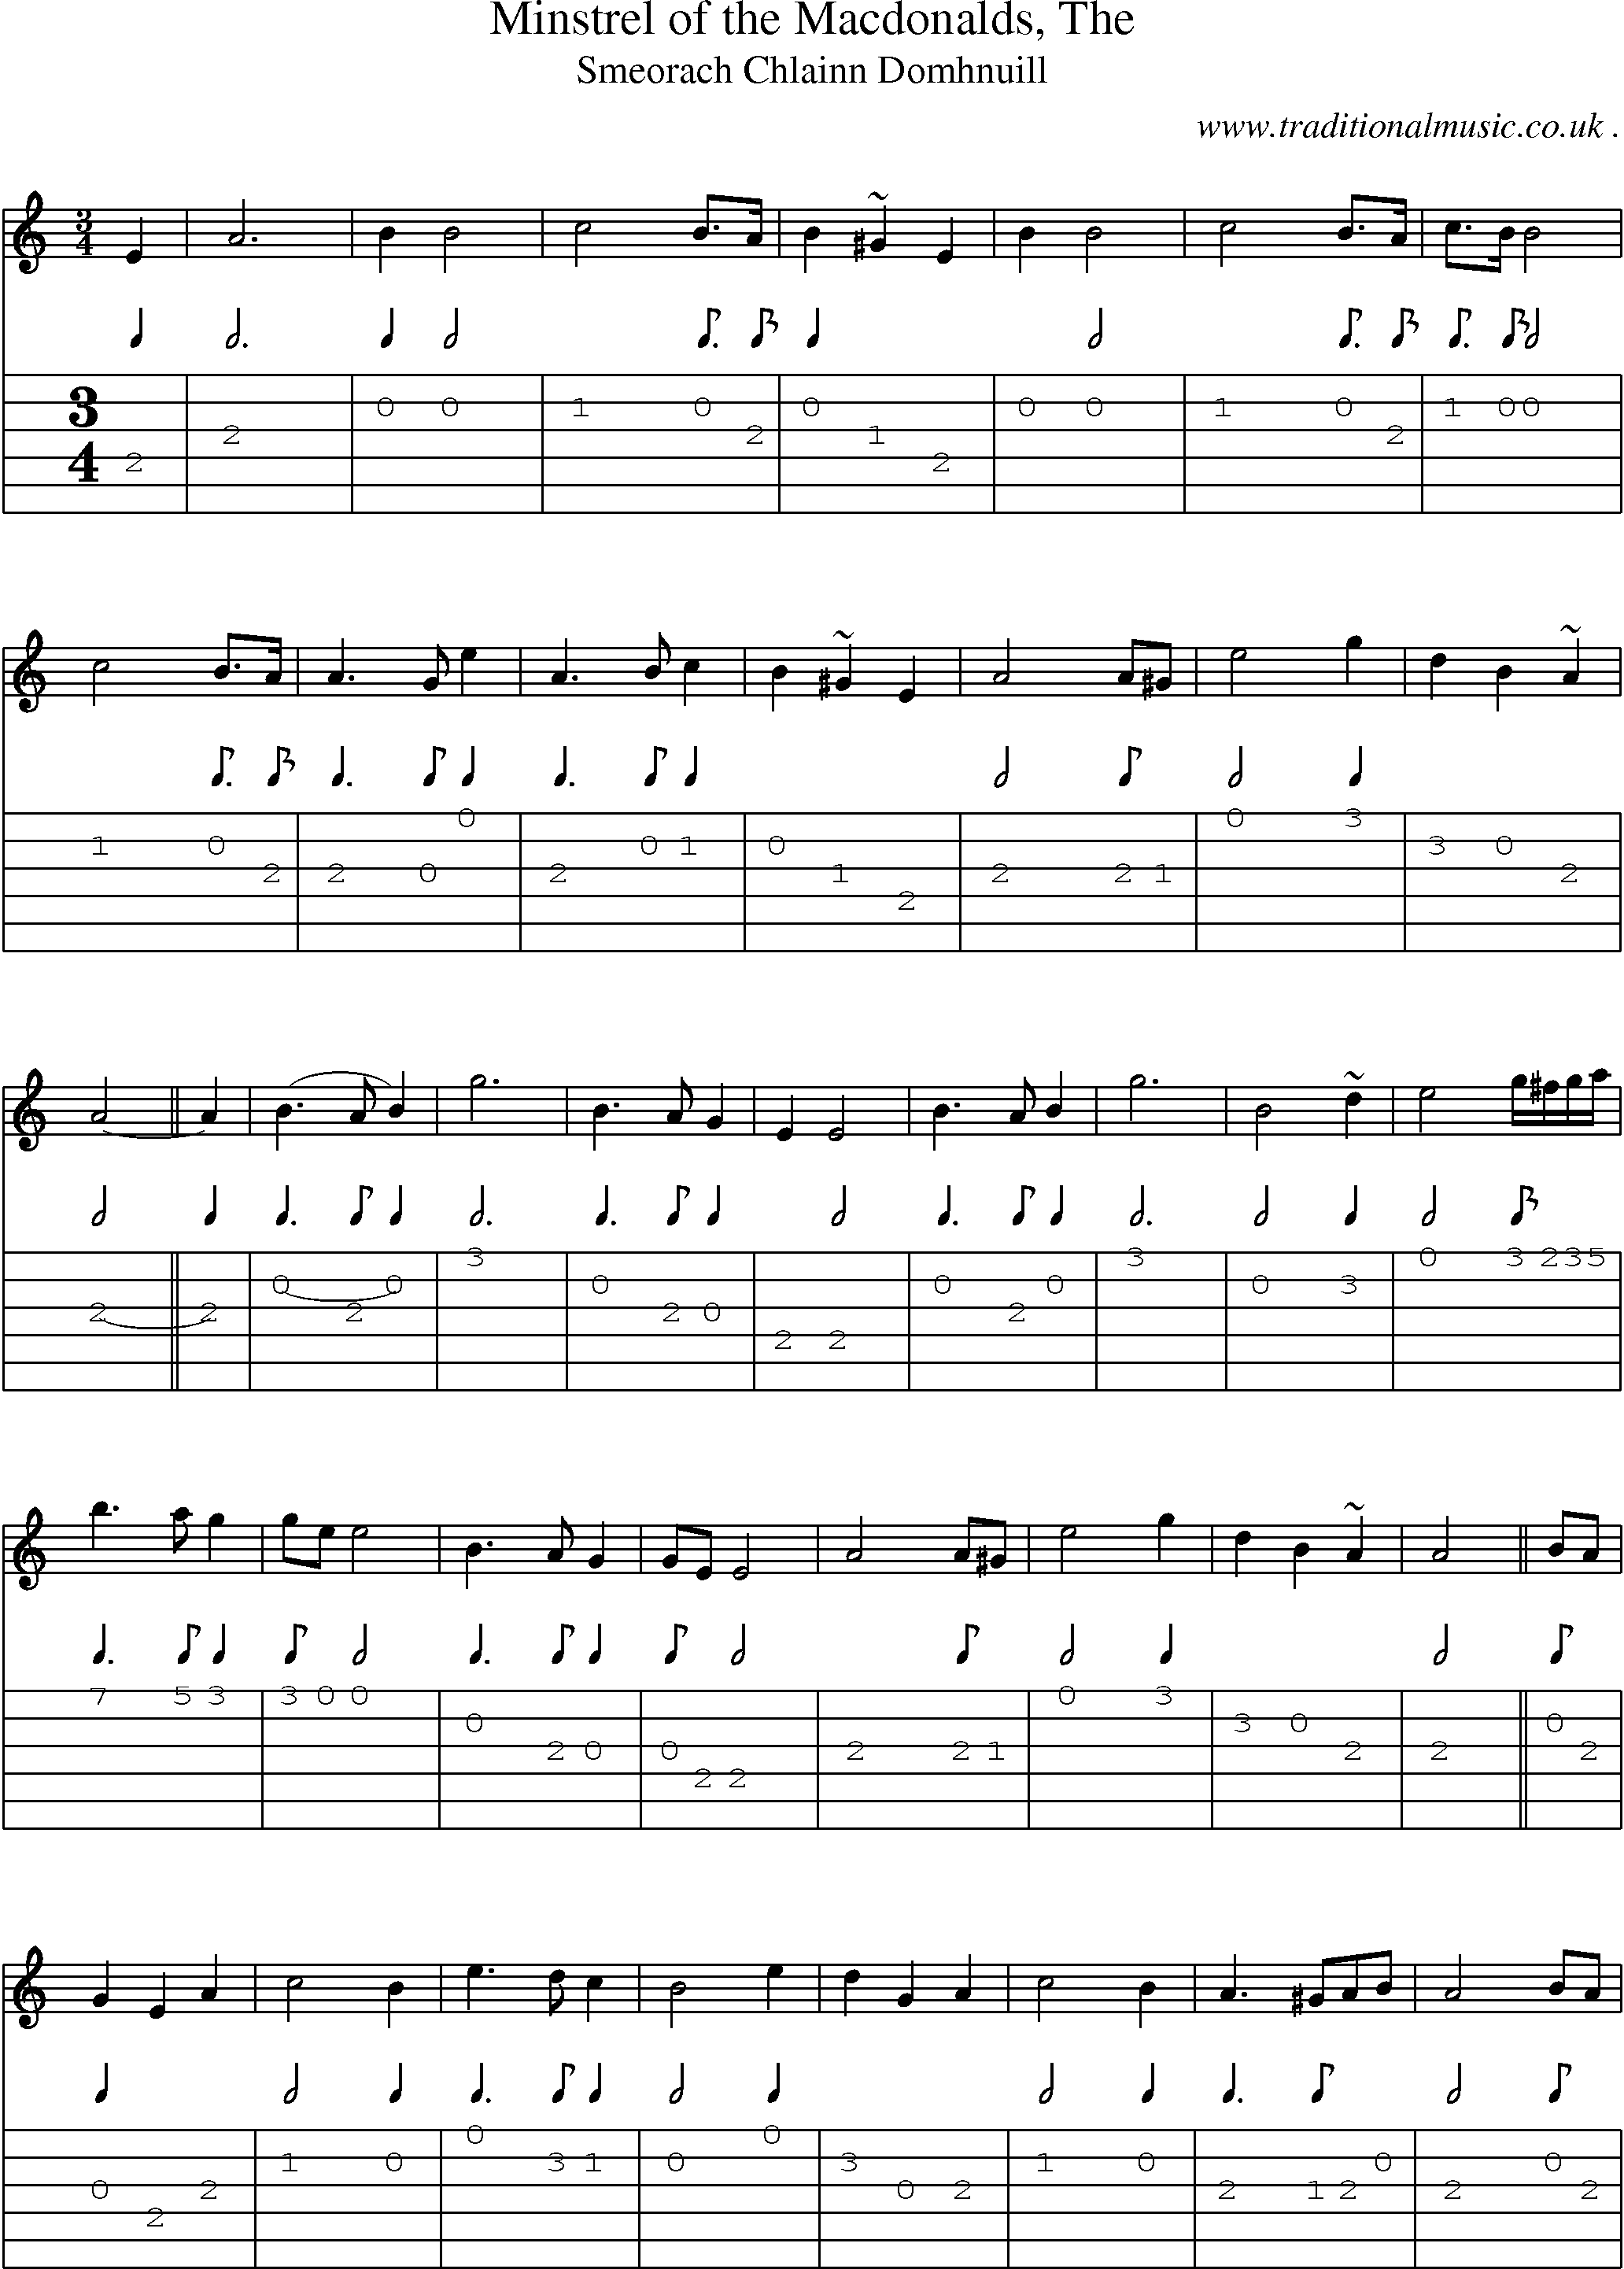 Sheet-music  score, Chords and Guitar Tabs for Minstrel Of The Macdonalds The